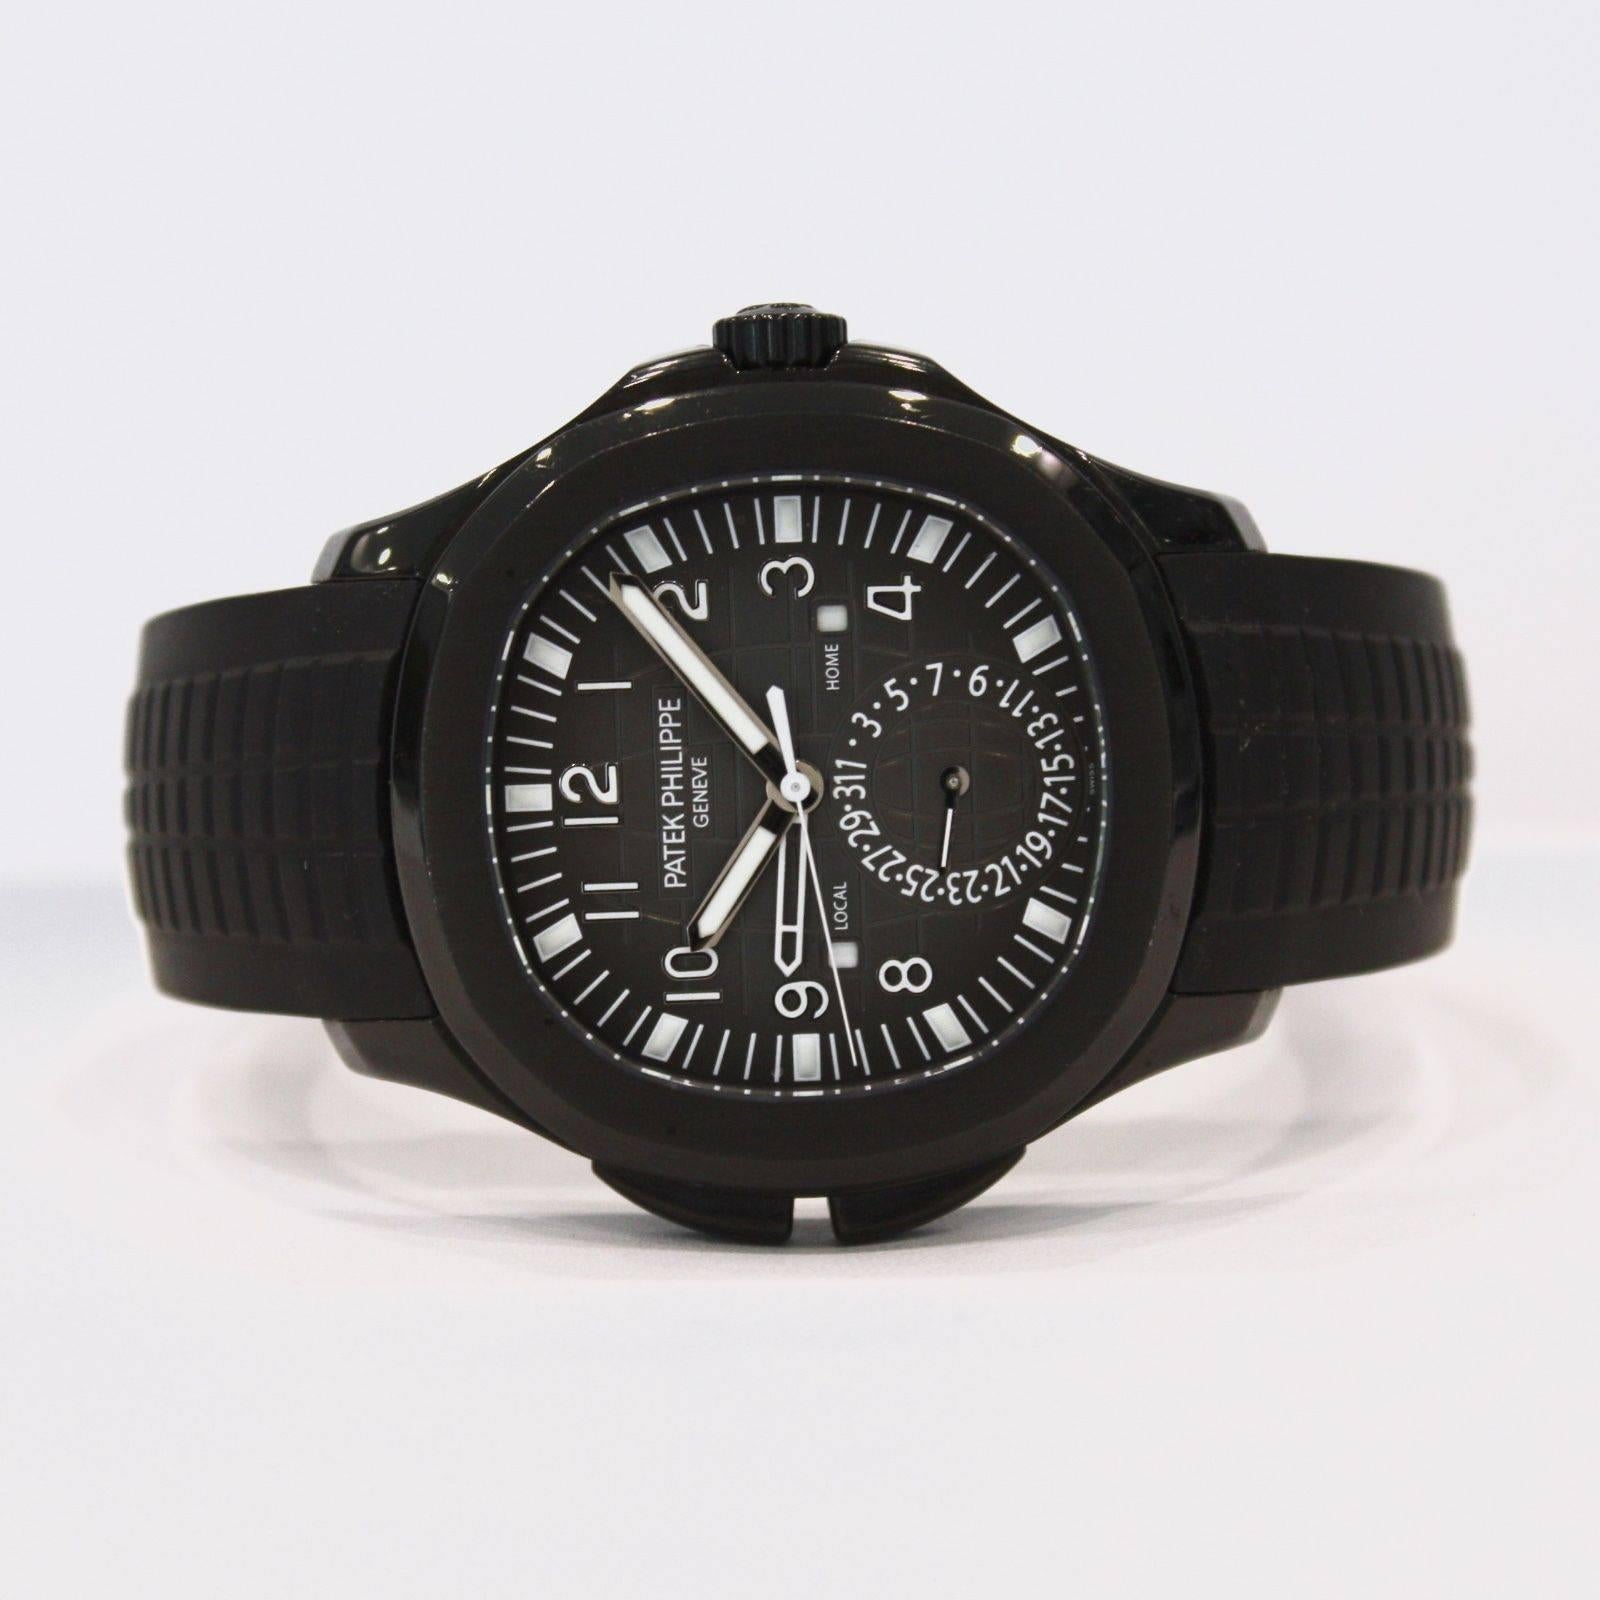 Brand Name: Patek Philippe
Style Number: 5164A
Also Called: 5164 A
Series: Aquanaut Travel Time 
Gender: Men's
Case Material; Stainless Steel DLC/PVD
Dial Color: Black
Movement: Automatic
Engine: Patek Philippe Caliber 324 S C (28,800vph, 213